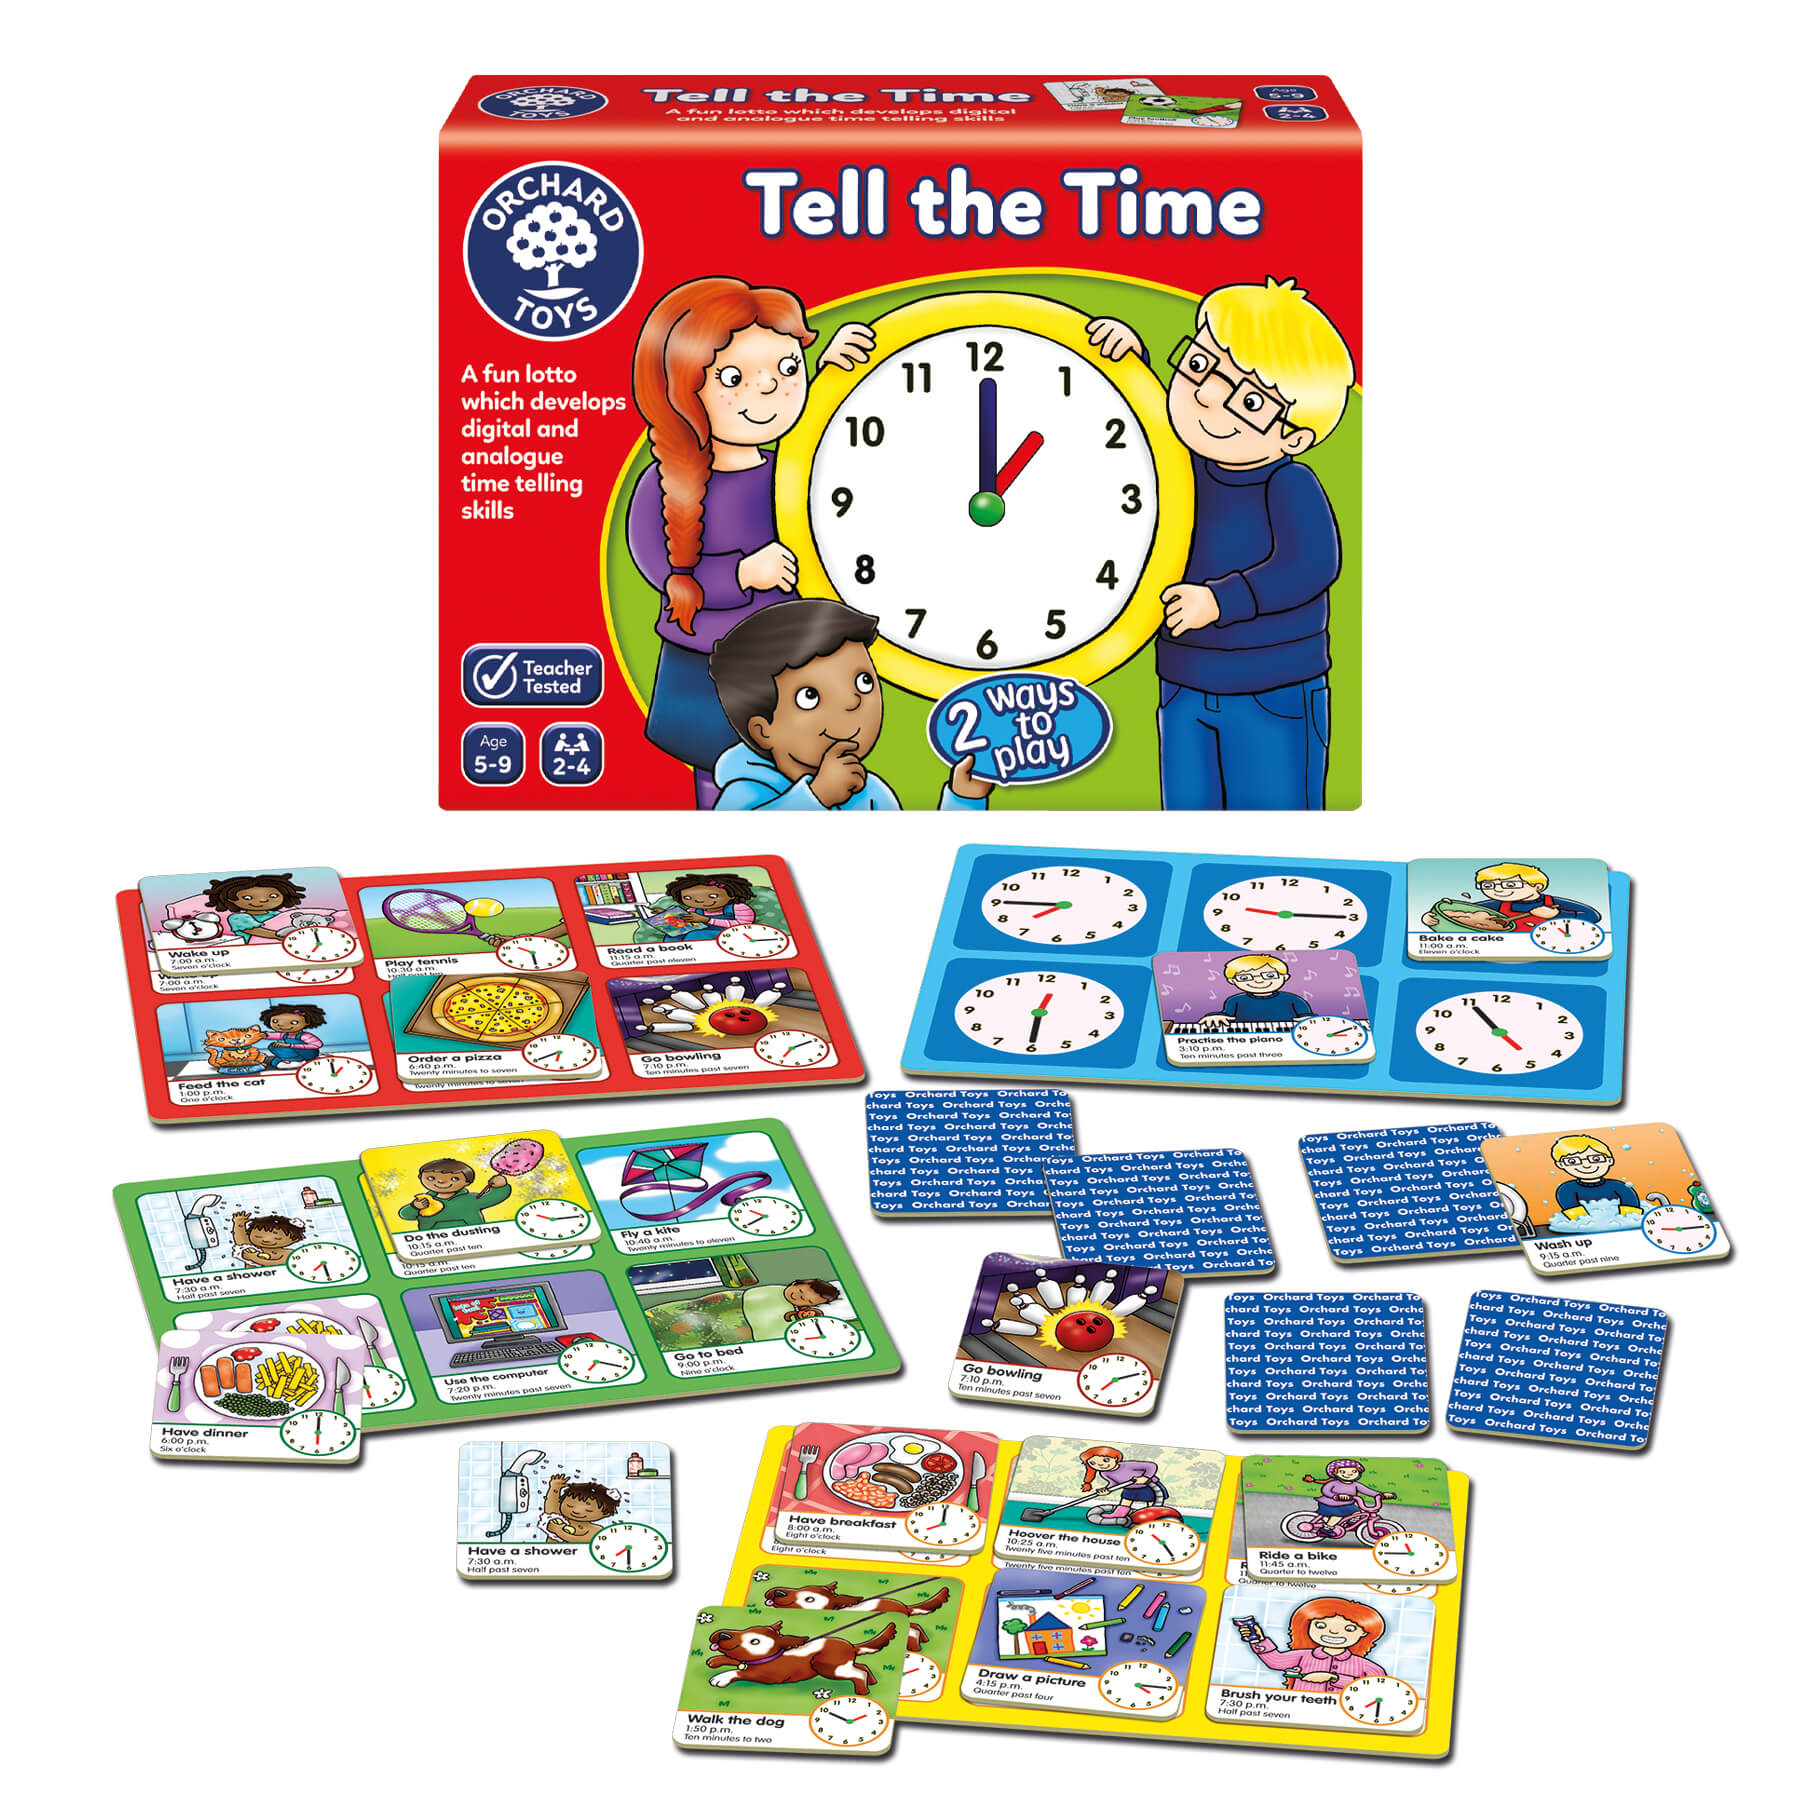 contents of tell the time - Orchard toys - number toys